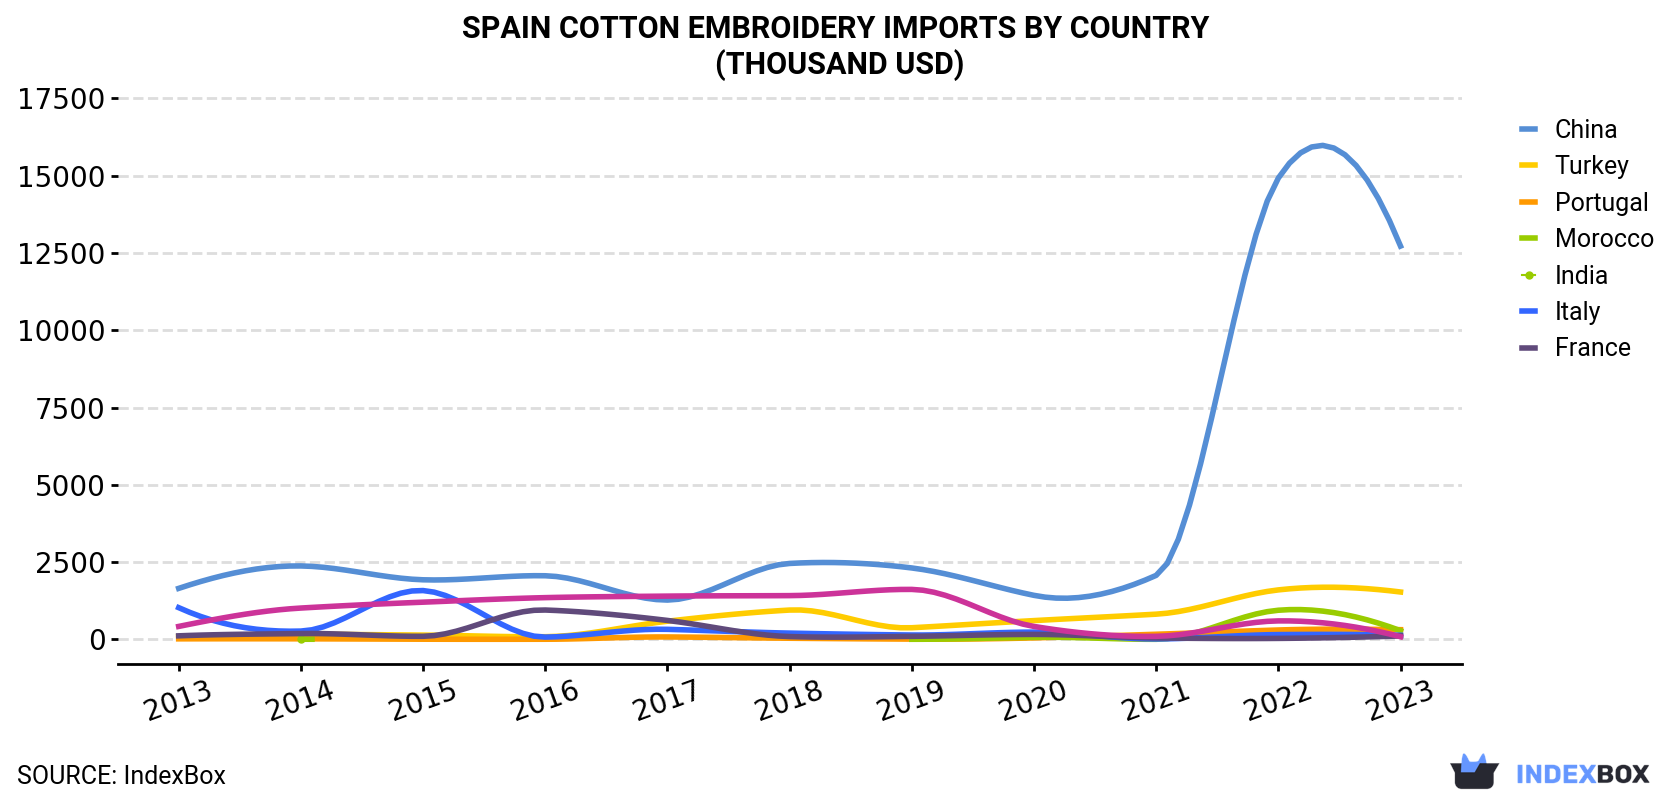 Spain Cotton Embroidery Imports By Country (Thousand USD)